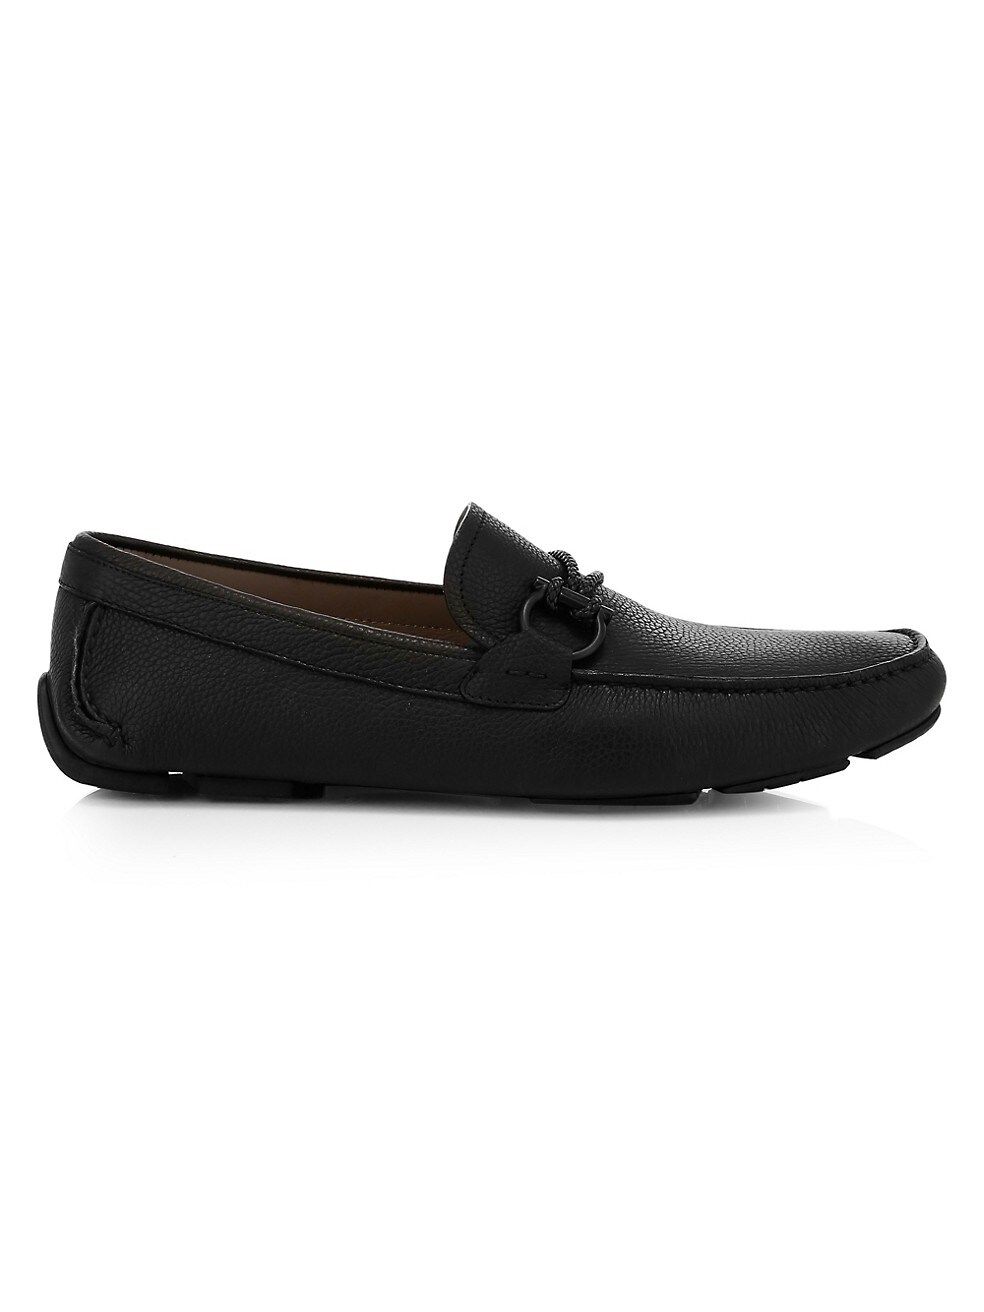 Salvatore Ferragamo Front Buckle Leather Driver Loafers | Saks Fifth Avenue